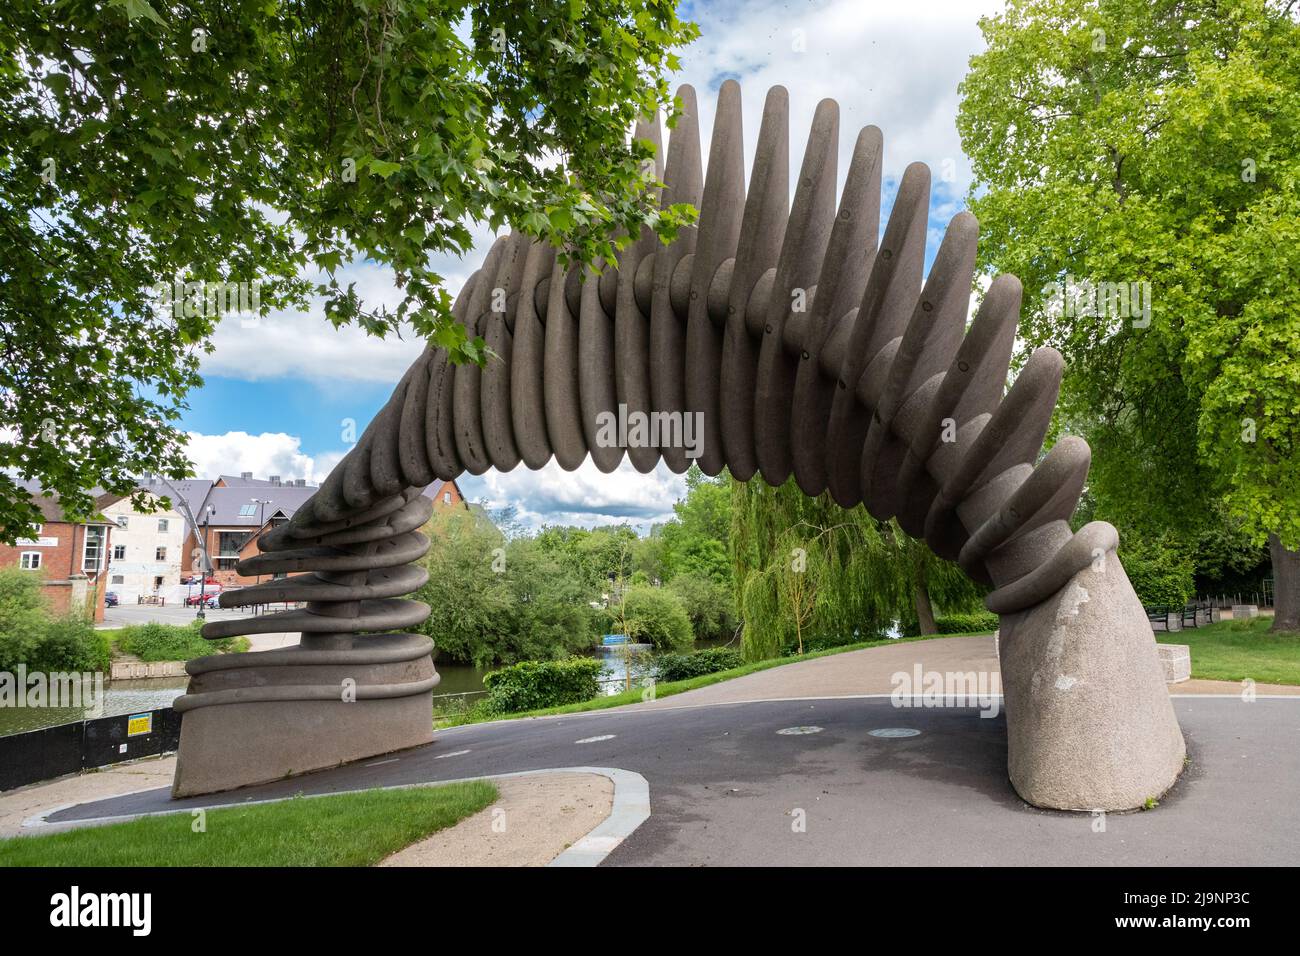 Modern art sculpture 'The Quantum Leap' in celebration of Charles Darwin in Shrewsbury, Shropshire on the banks of the River Severn Stock Photo